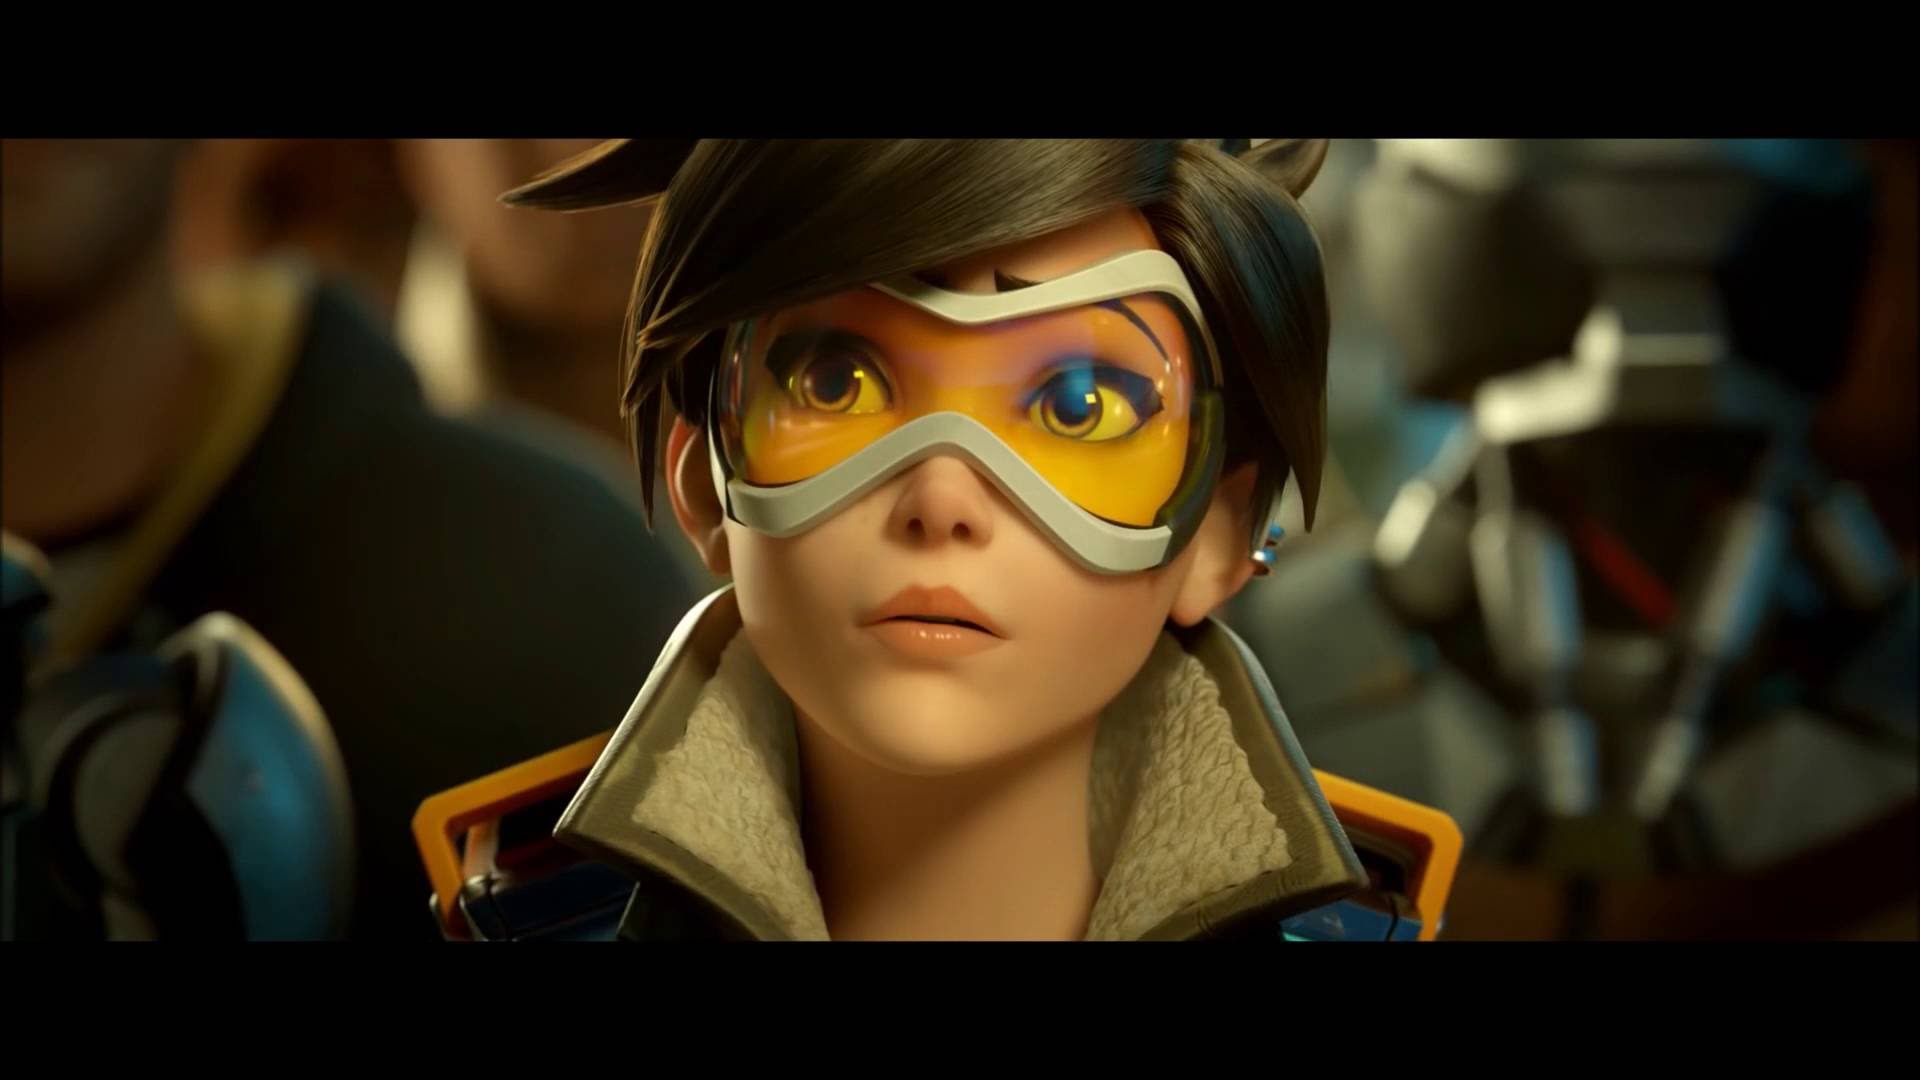 familie Balehval spiselige 50, price not discussable] Overwatch: Cinematic Tracer for fan render in  Unreal - Paid Work - Blender Artists Community